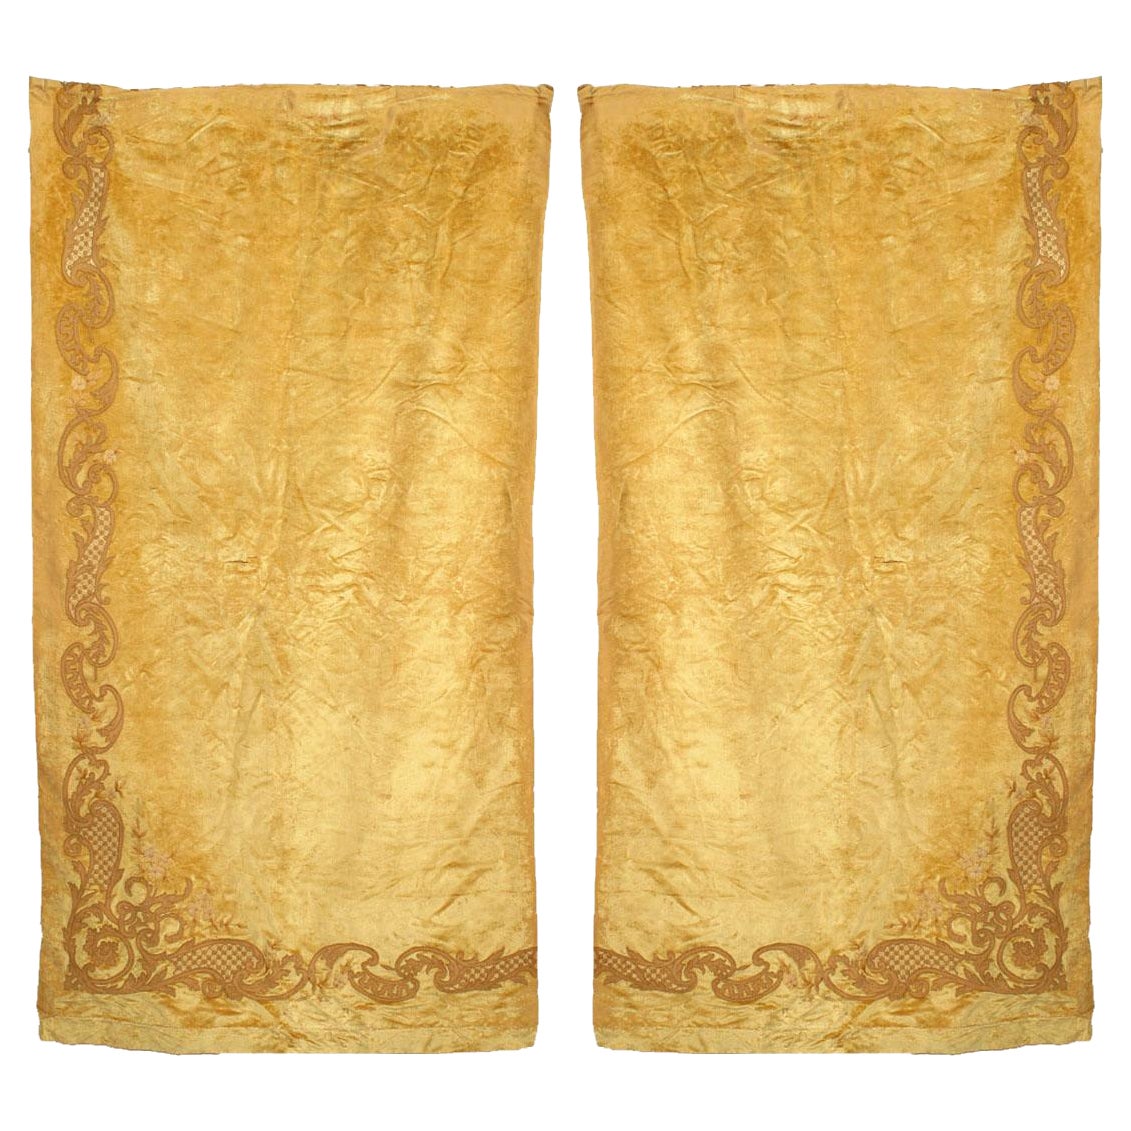 PAIRS OF METALLIC ANTIQUE MUSTARD GOLD GILT RETRO WAVES LINED EYELET CURTAINS 